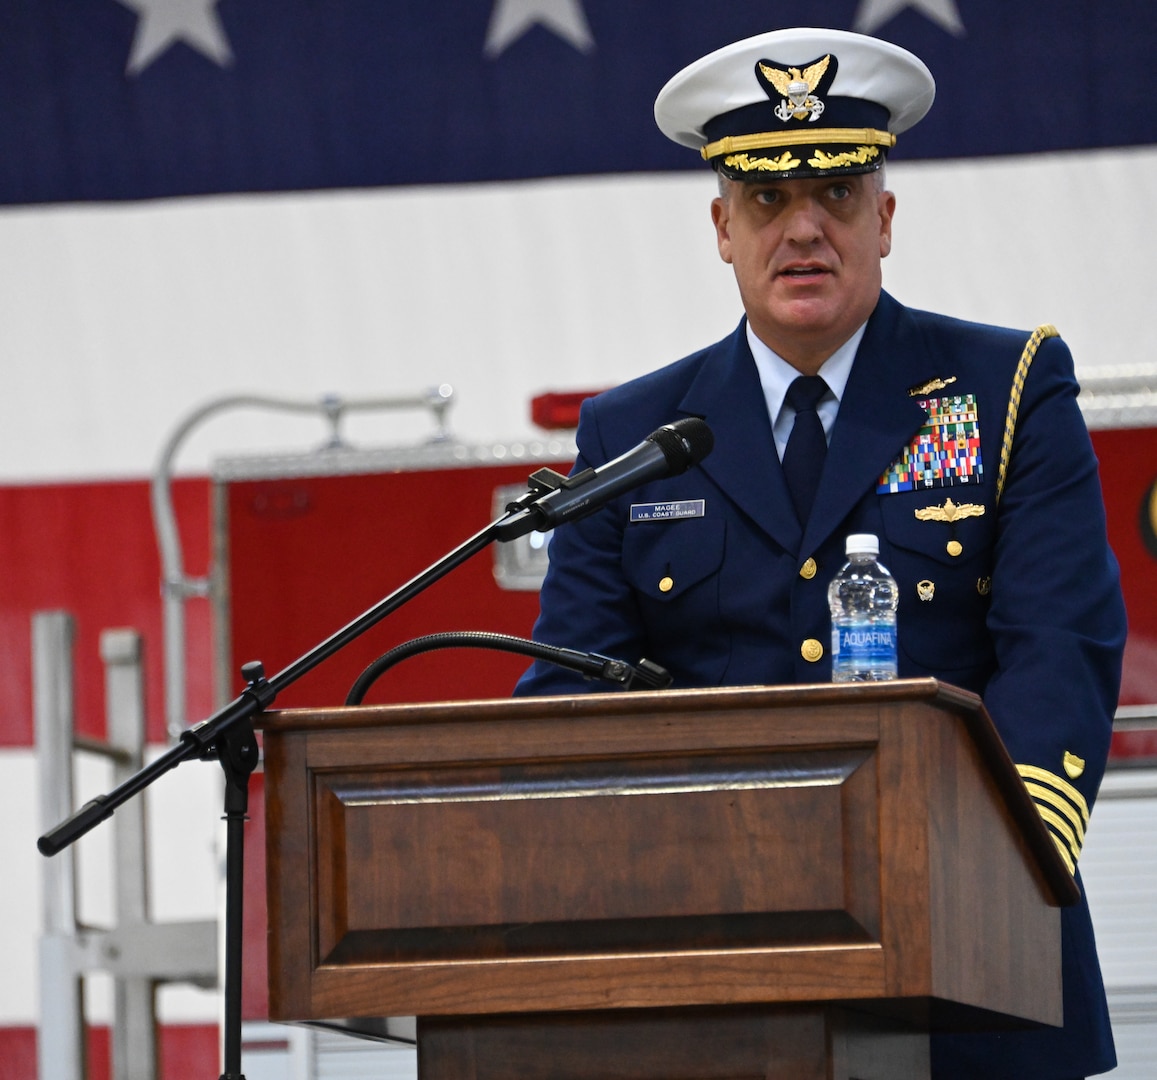 U.S. Coast Guard Capt. Greg Magee, Deputy Director of Operational Logistics, Coast Guard Headquarters,  
addresses Base Kodiak personnel and audience members during a change-of-command ceremony at Air Station Kodiak, June 6, 2023. The change-of-command ceremony is a historic Coast Guard and Naval tradition, which has remained unchanged for centuries and includes the reading of the command orders in the presence of all unit crewmembers. U.S. Coast Guard photo by Petty Officer 3rd Class Ian Gray.